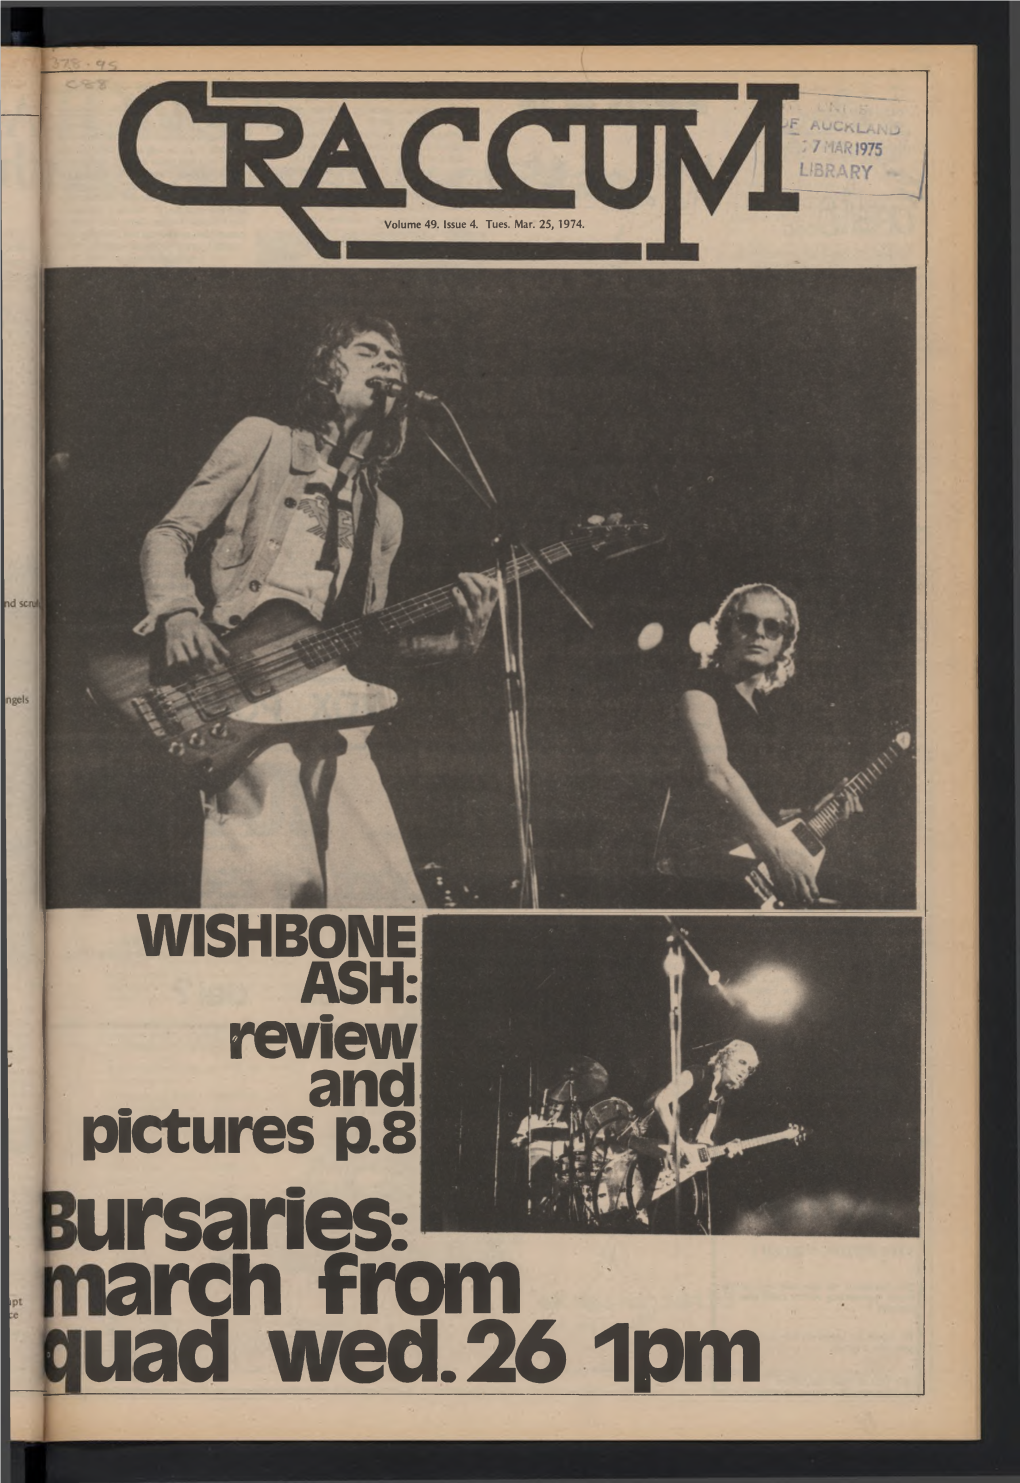 WISHBONE ASH: Review and Pictures P.8 Ursaries: Arch from Uad Wed